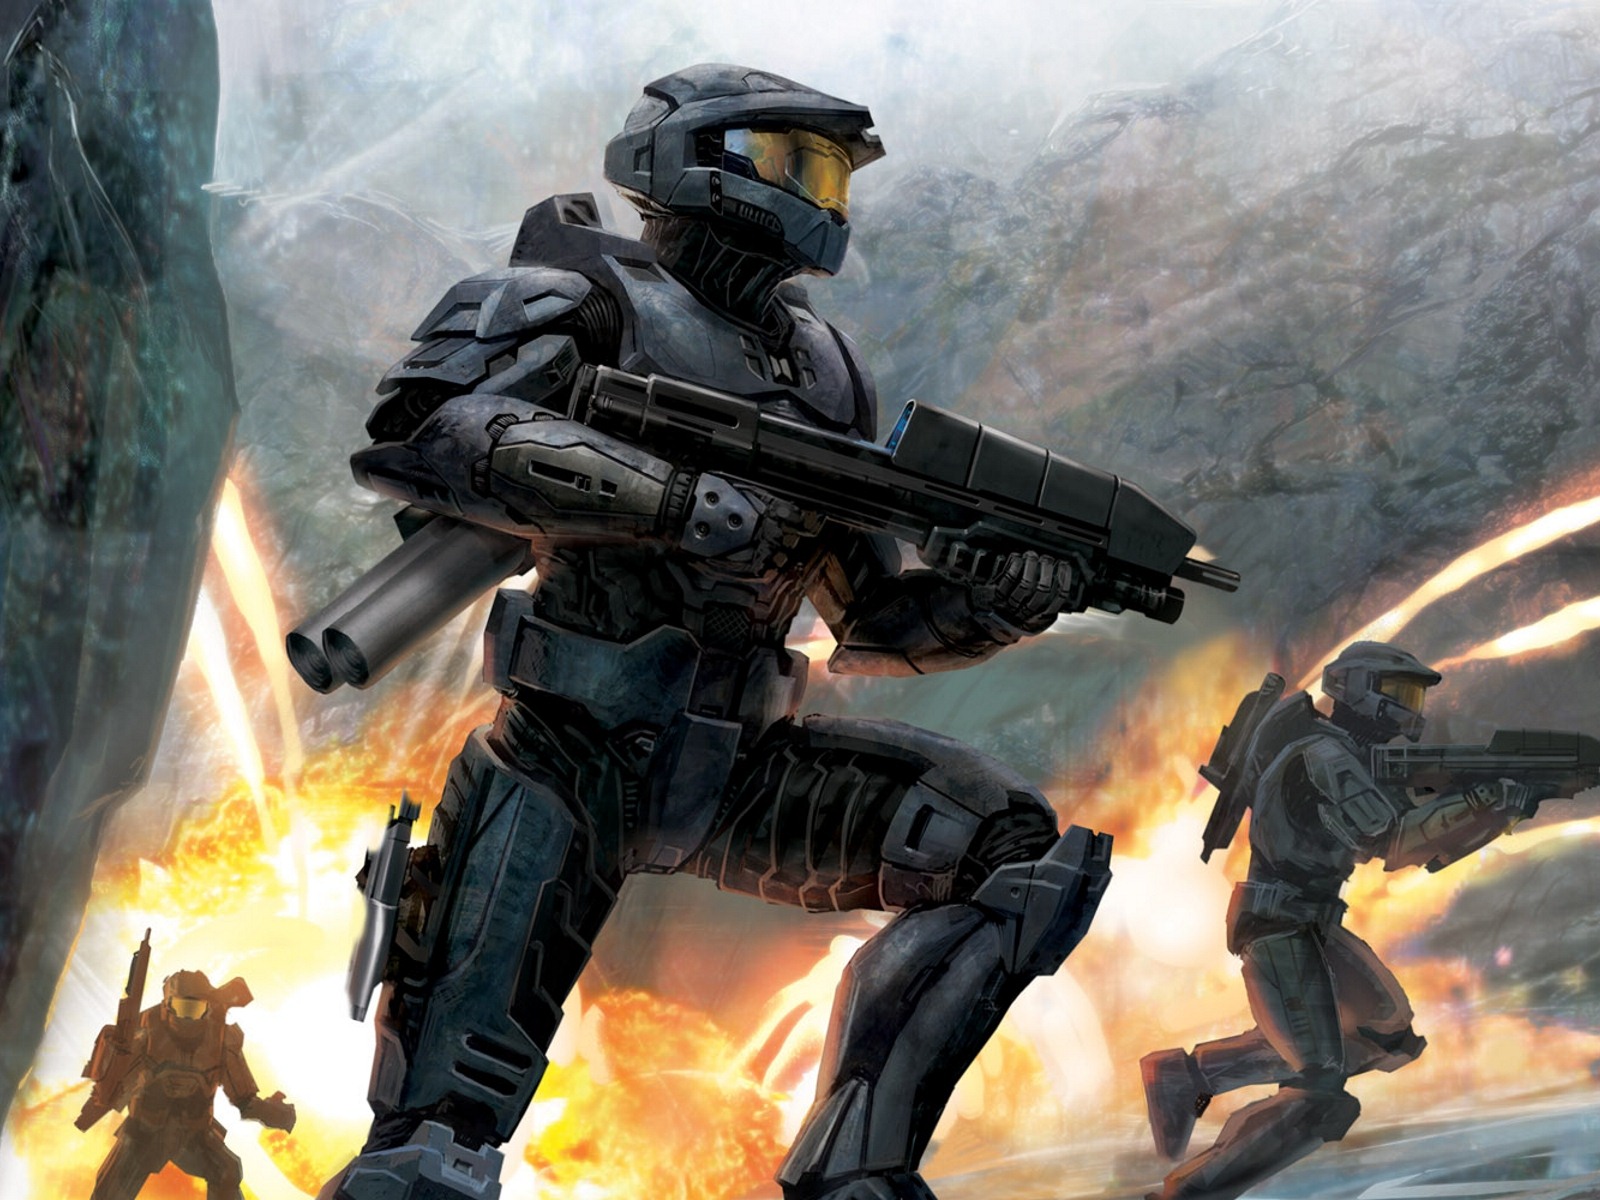 Halo game HD wallpapers #4 - 1600x1200